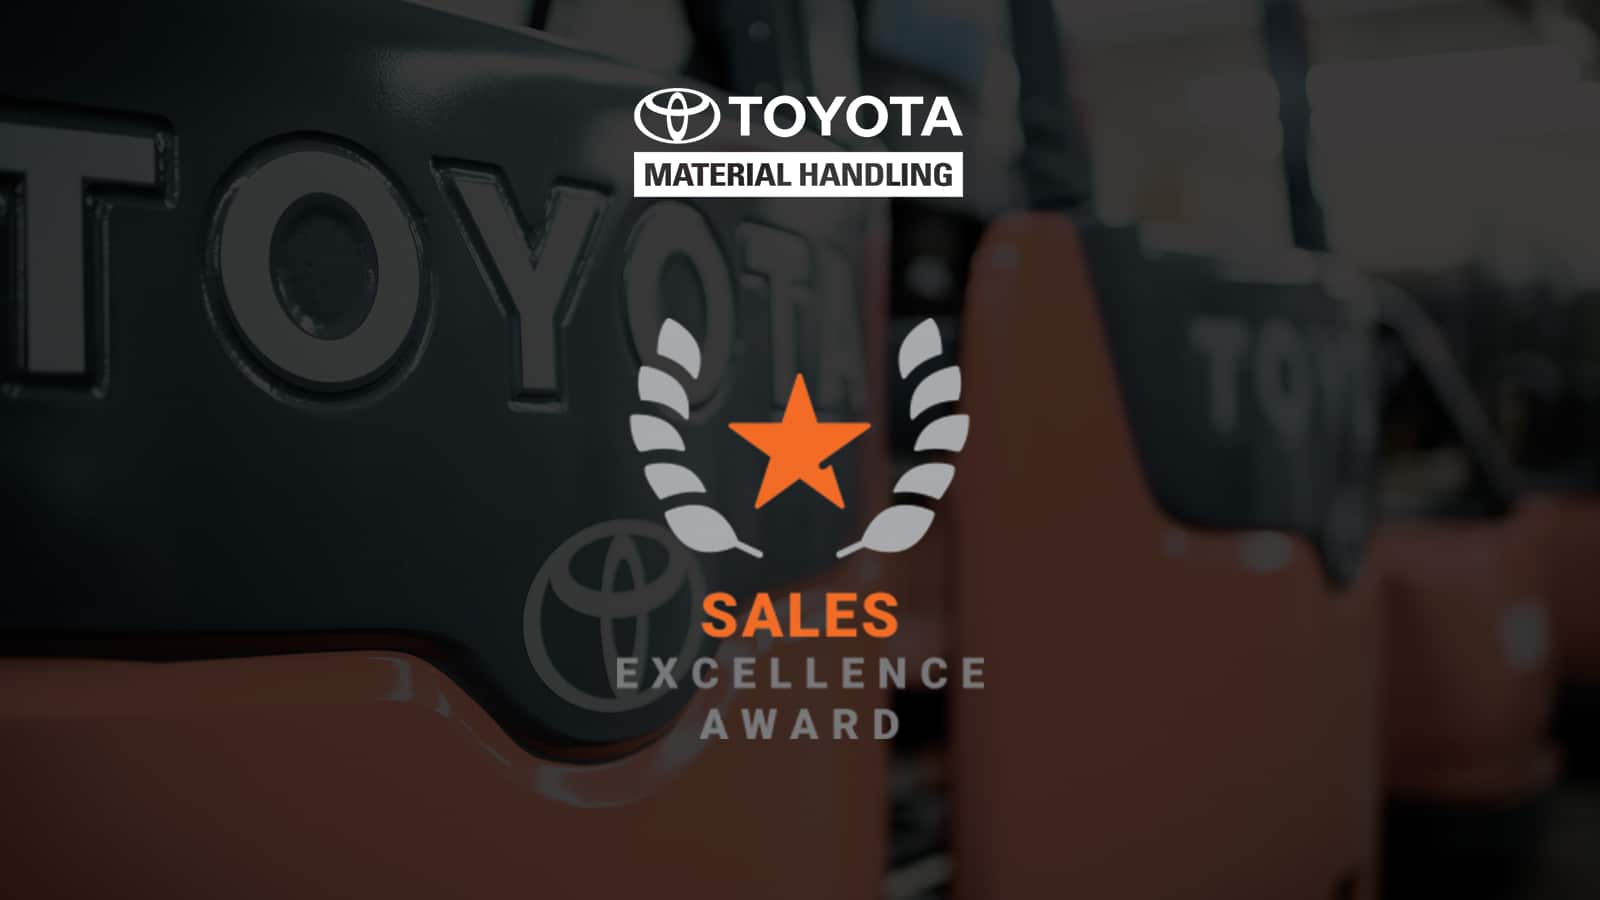 welch equipment receives toyota material handling sales excellence award